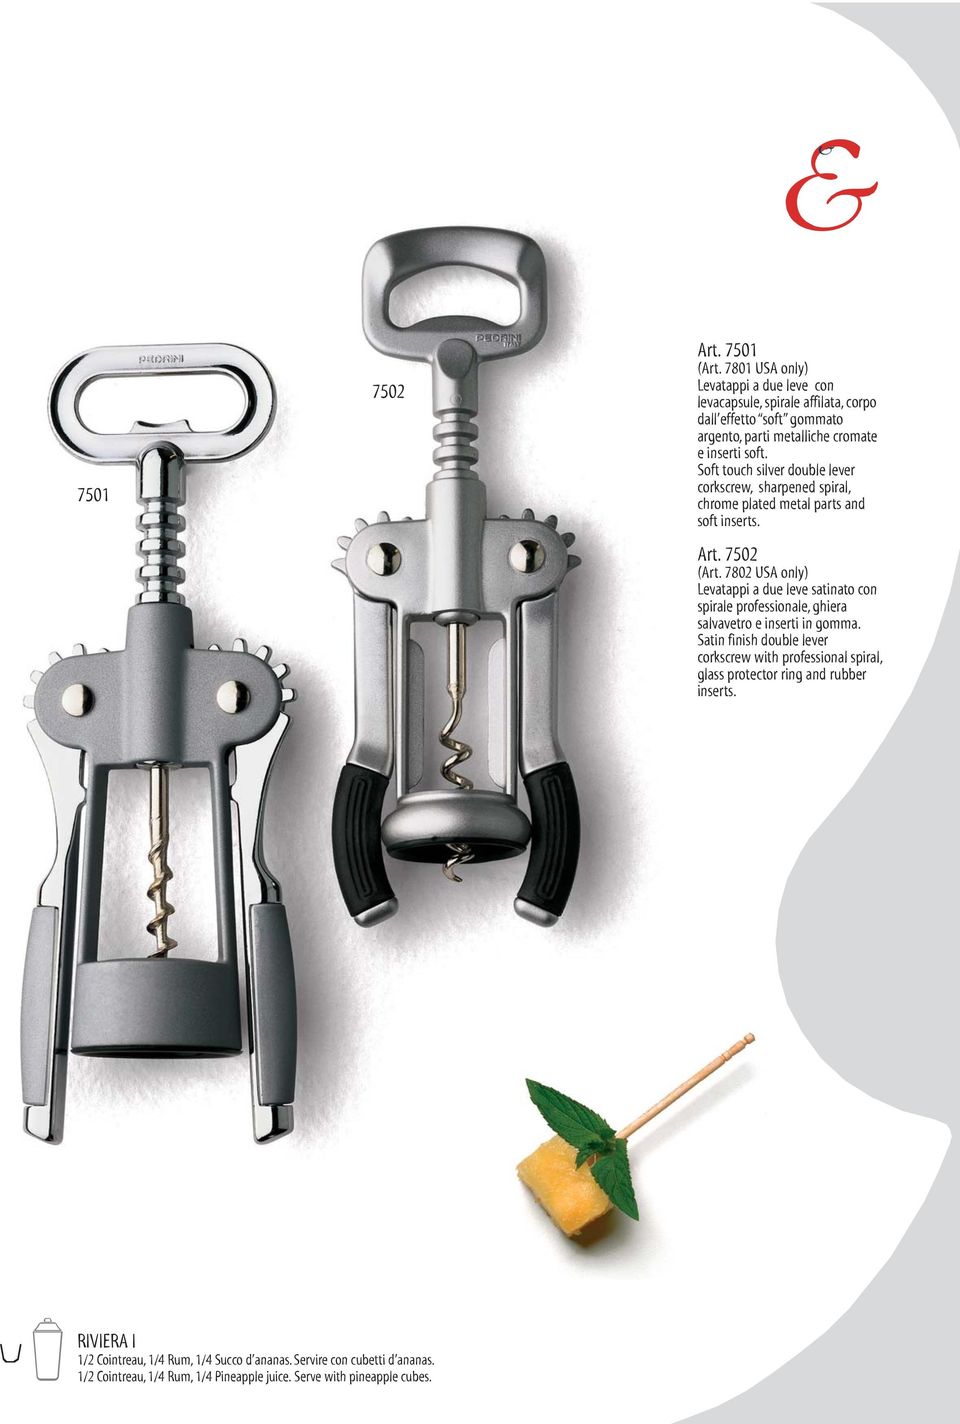 Soft touch silver double lever corkscrew, sharpened spiral, chrome plated metal parts and soft inserts. Art. 7502 (Art.